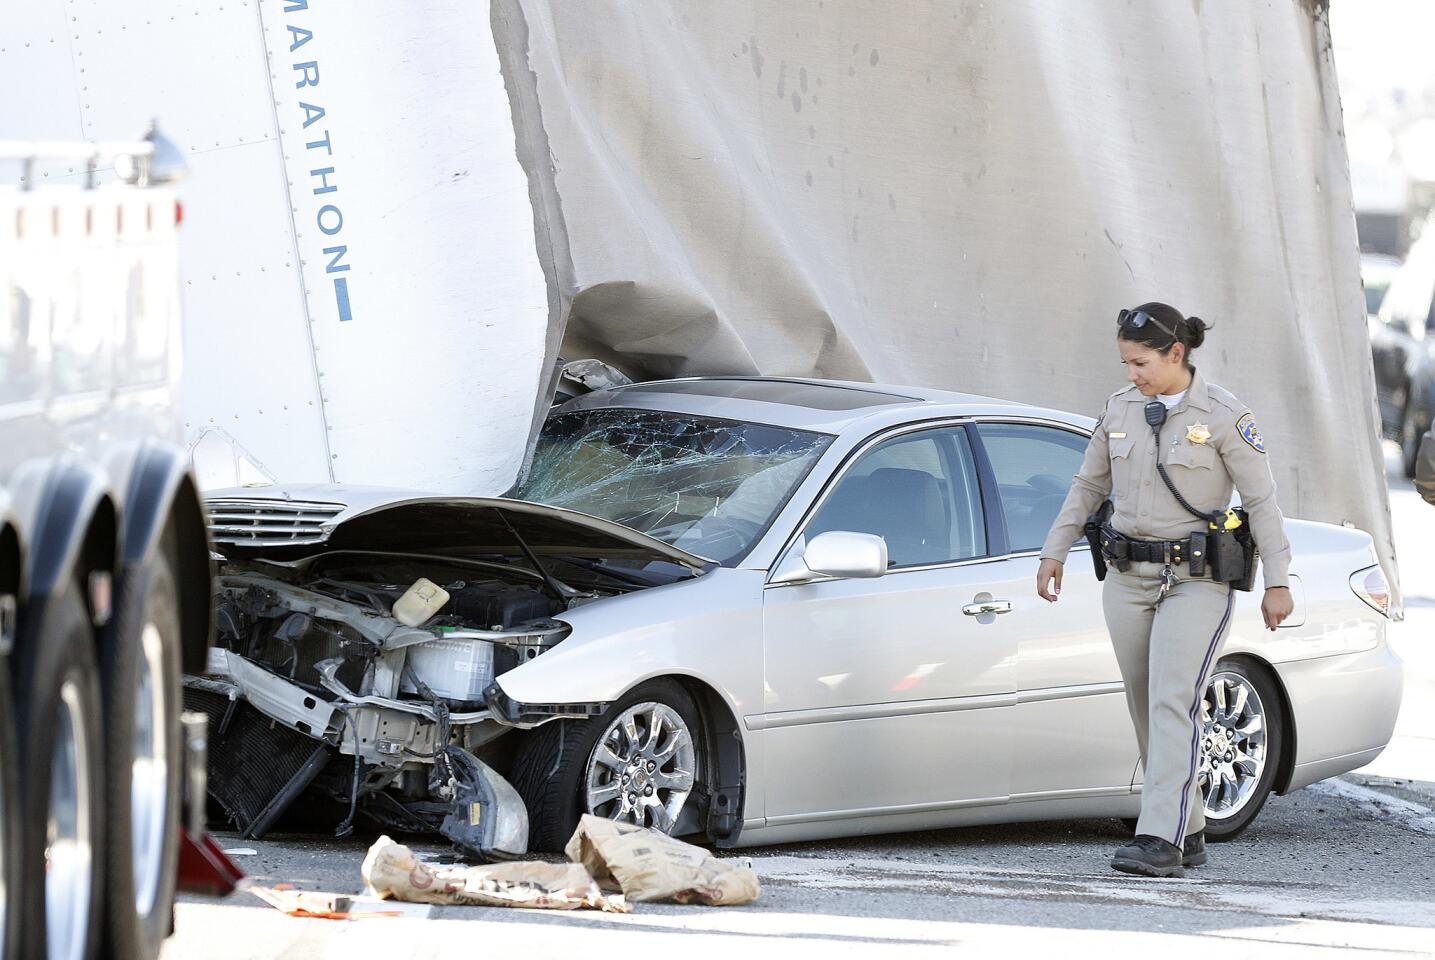 Photo Gallery: Box truck and car tangle at southbound Interstate 5 exit at Burbank Boulevard